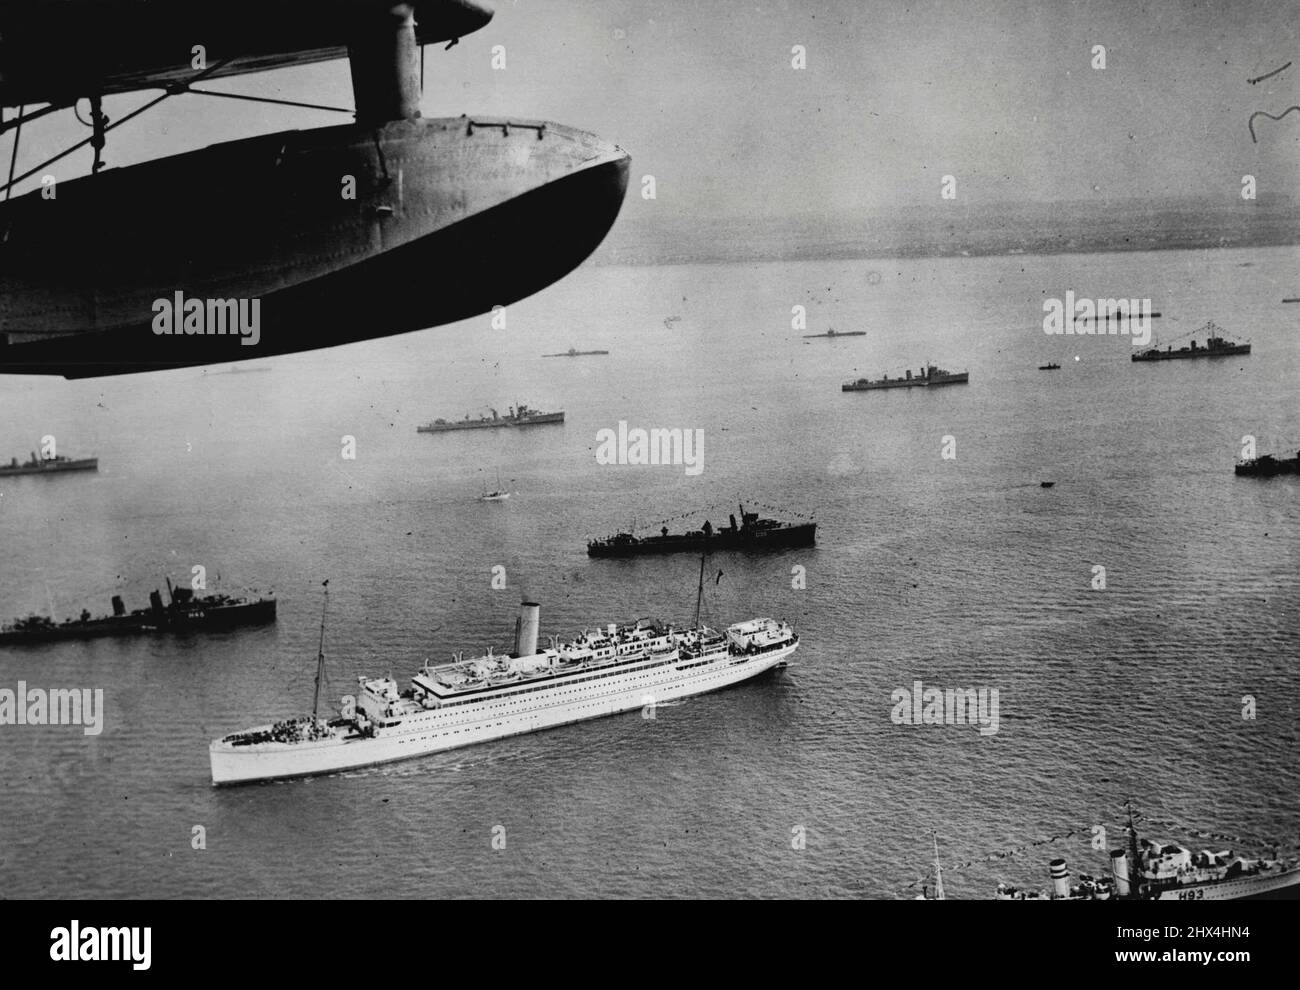 The Fleet Awaits The King's Review - A view taken from a flying-boat this morning at Spithead, off Portsmouth, showing a liner boaring guests between the lines of the mighty Fleet assembled for the Royal Review by King George VI today. May 20, 1937. (Photo by The Topical Press). Stock Photo